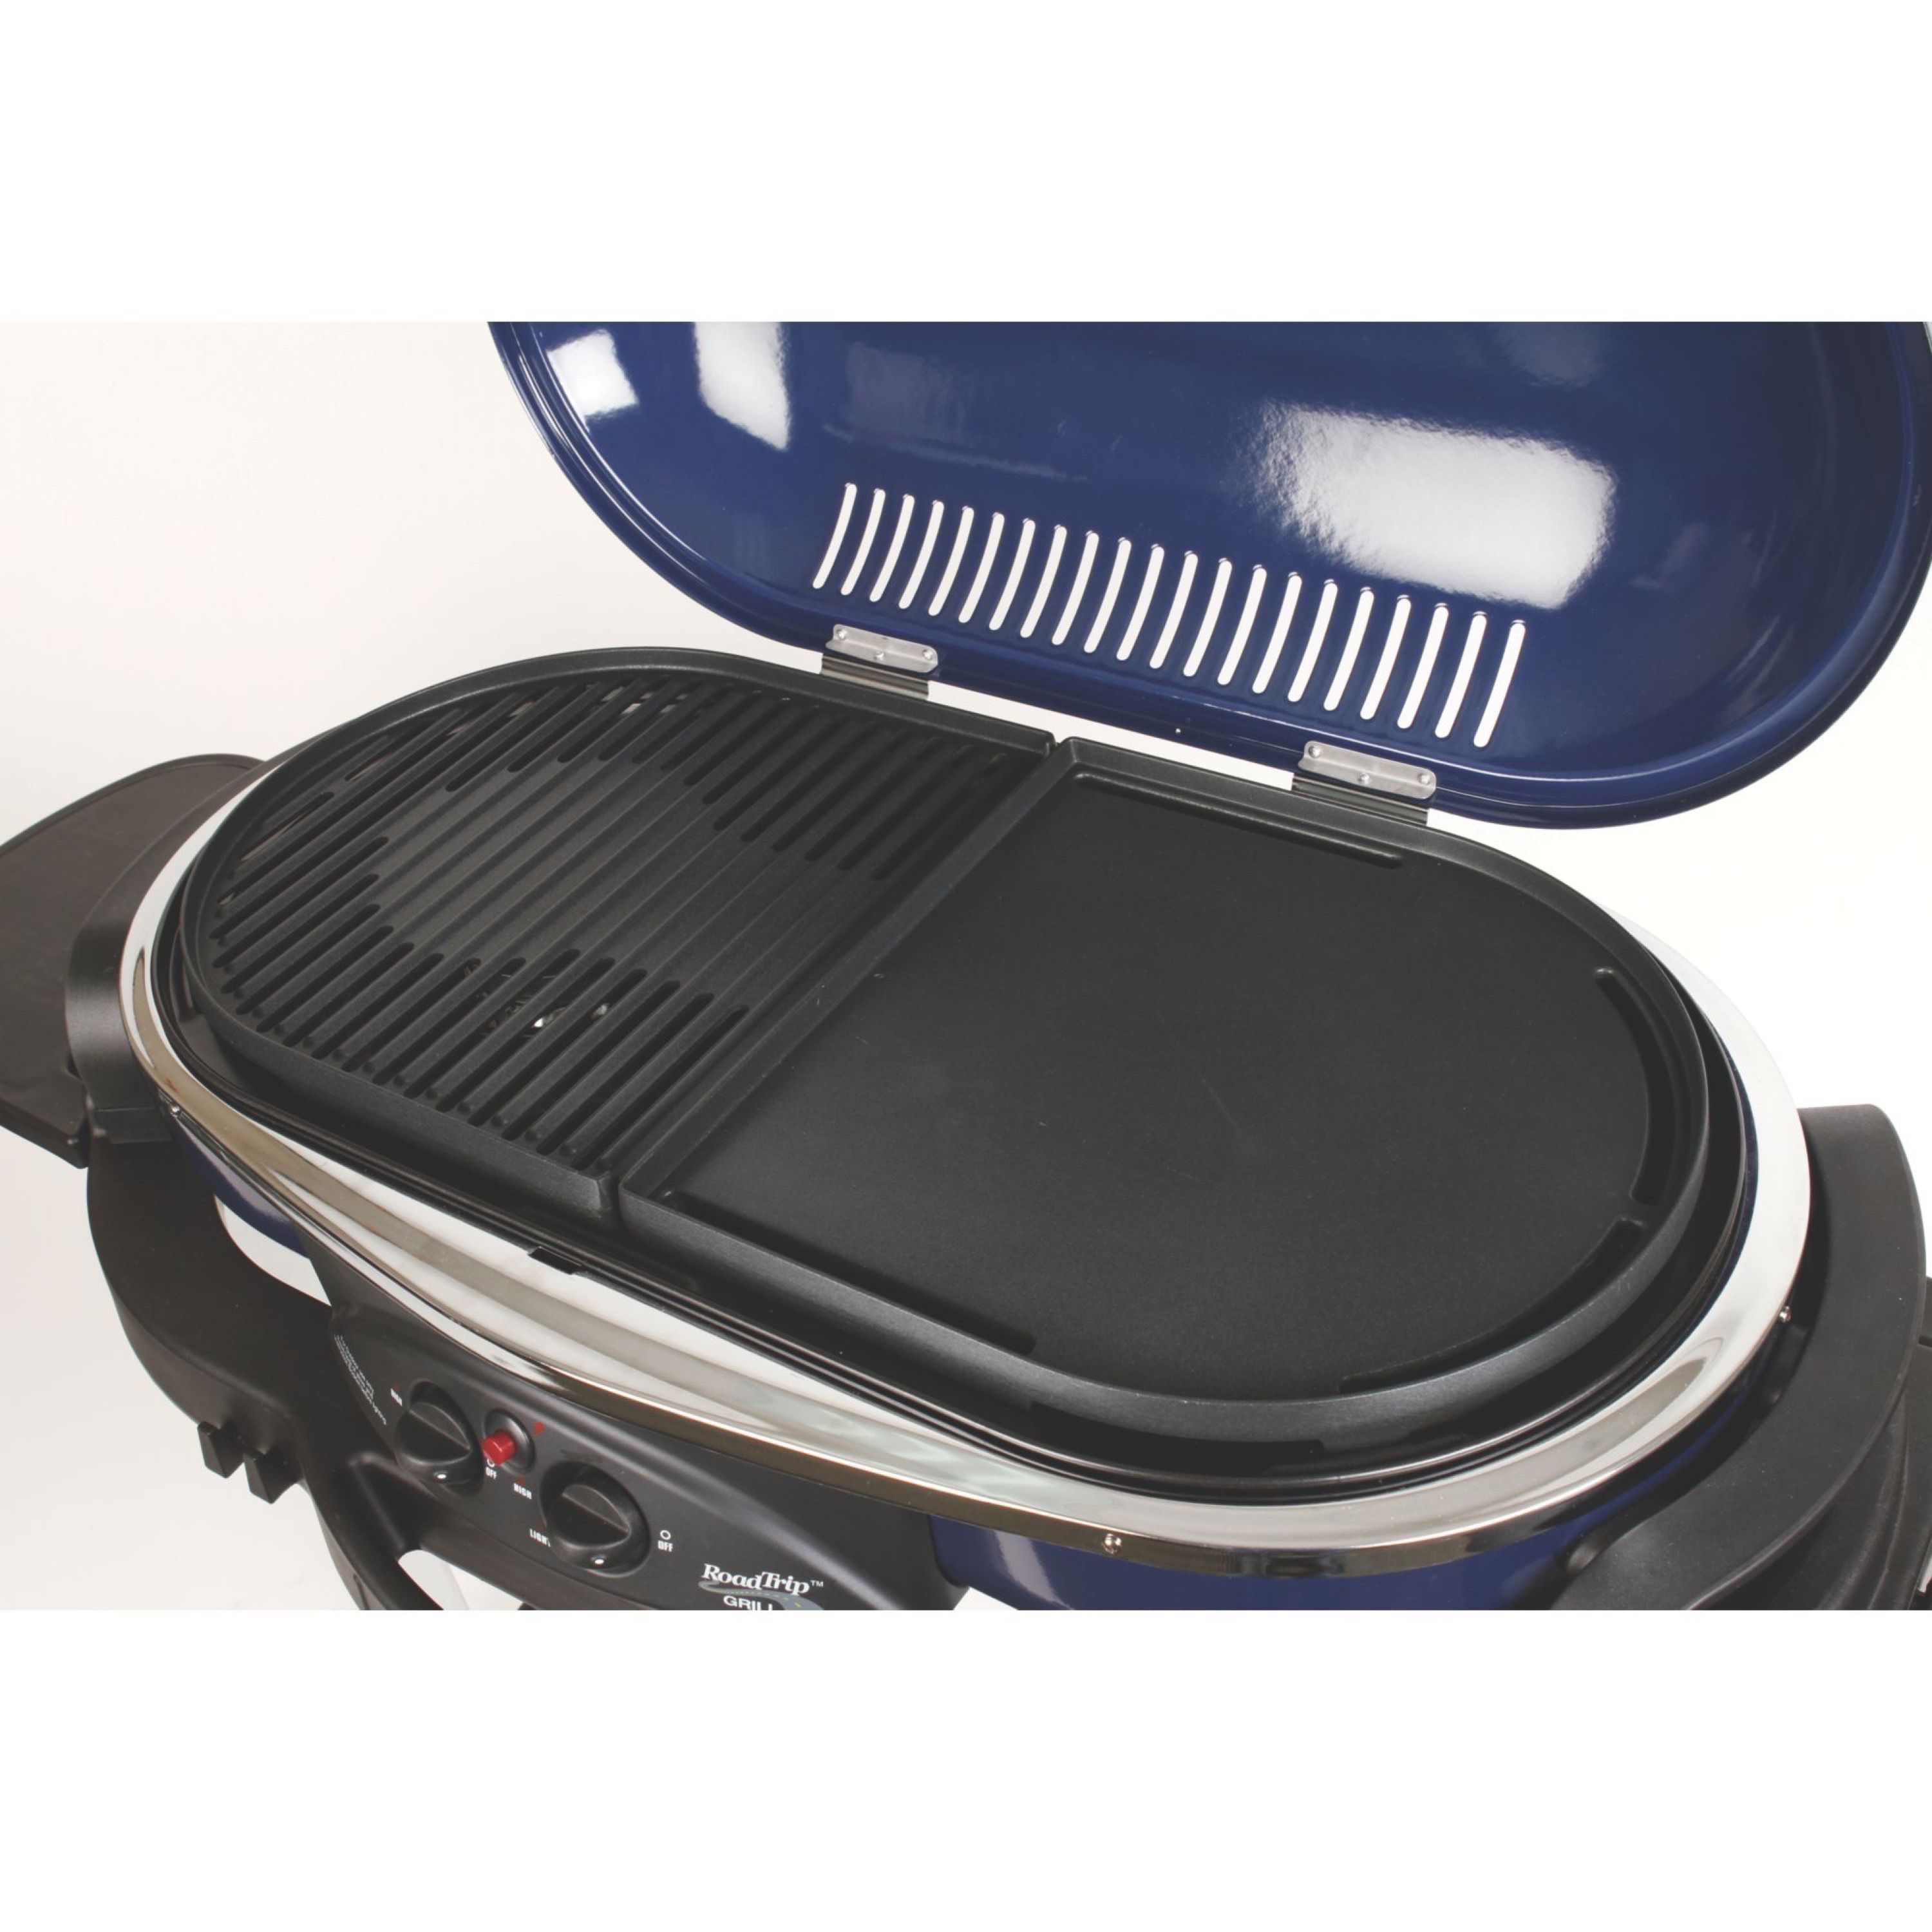 Coleman RoadTrip LX Standup Propane Gas Grill - image 5 of 14